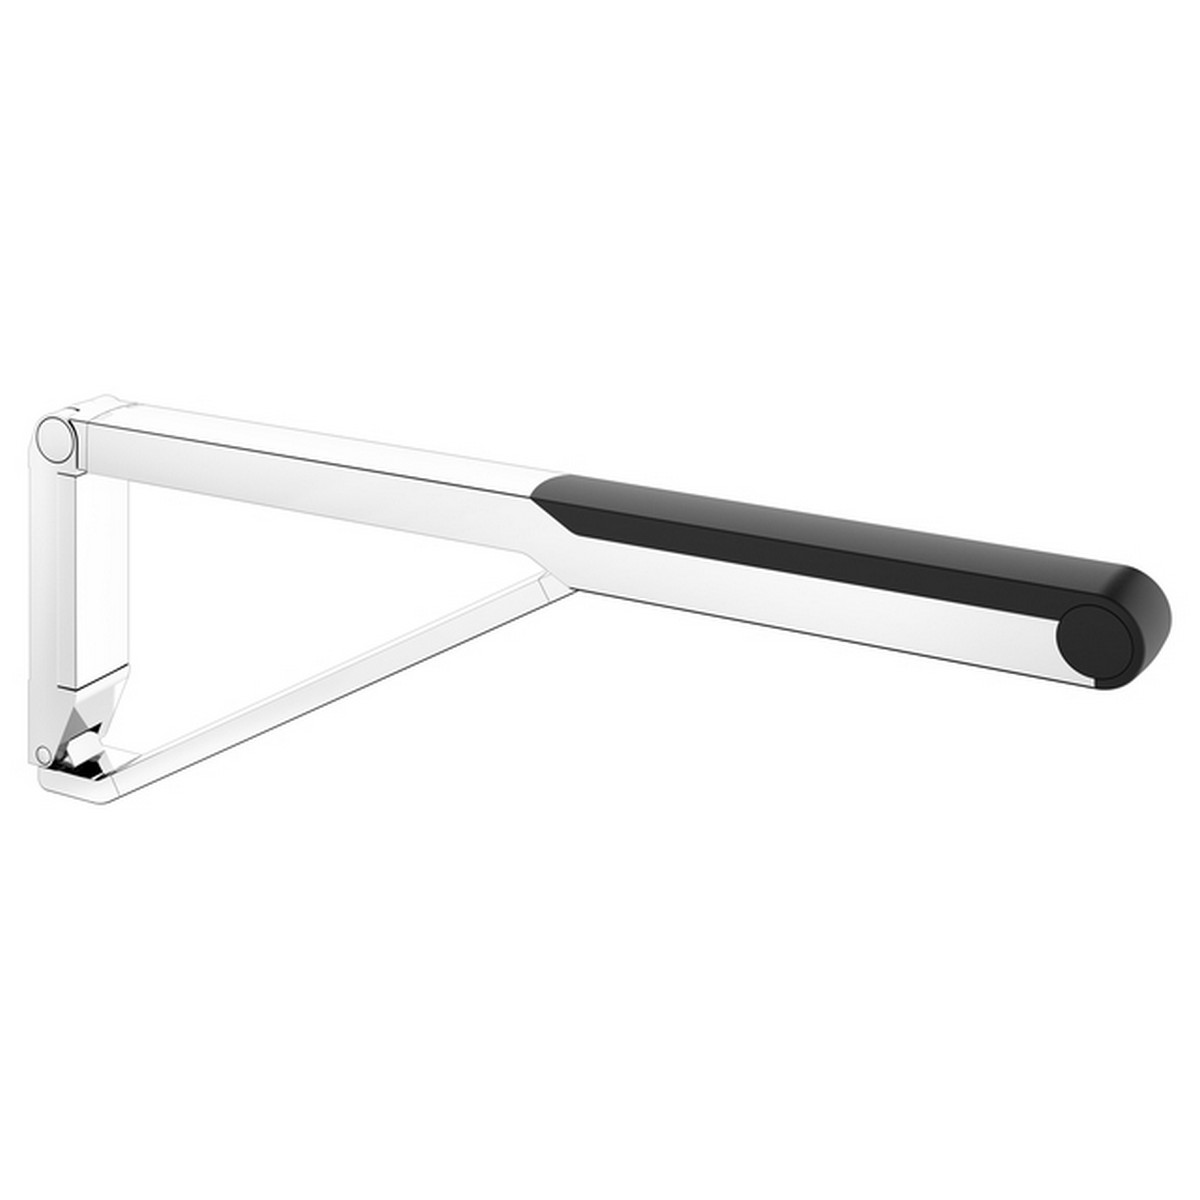 KEUCO 3500307 AXESS 27 1/2 INCH WALL MOUNTED FOLD DOWN SUPPORT RAIL